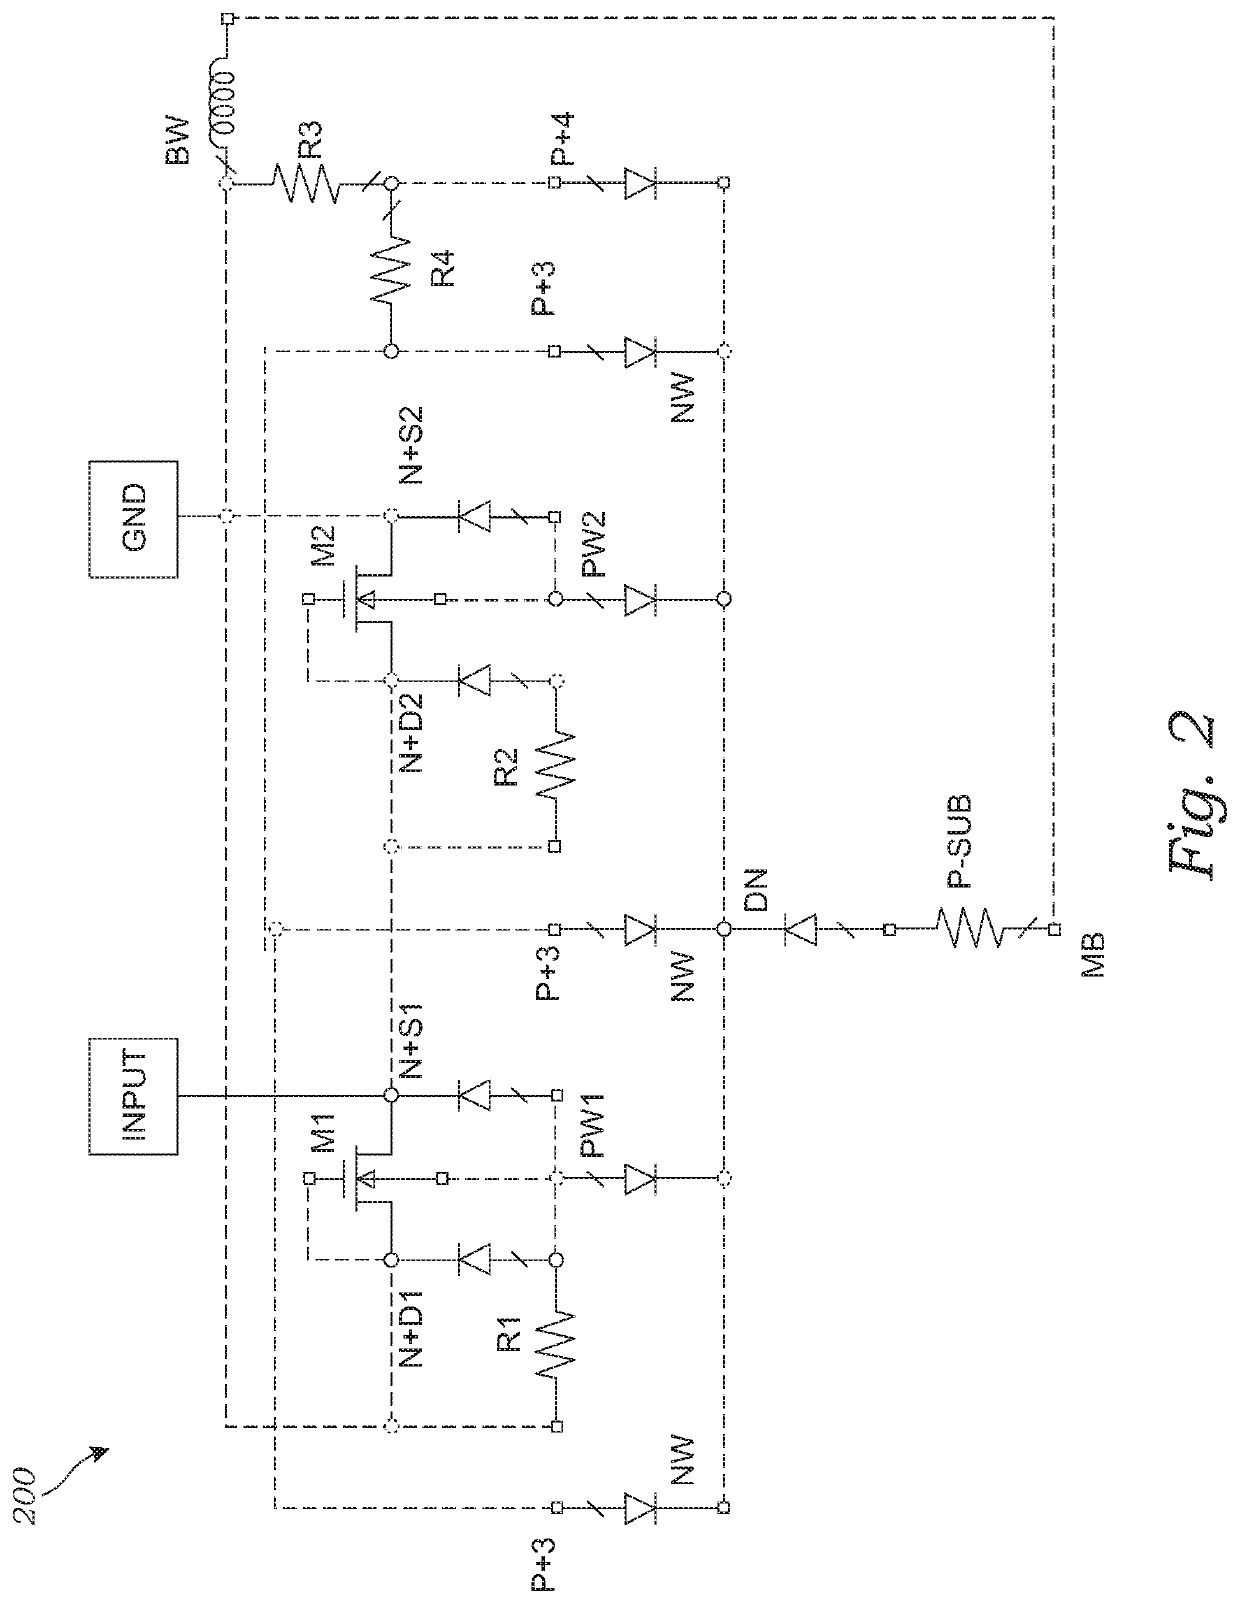 CMOS RF power limiter and ESD protection circuits